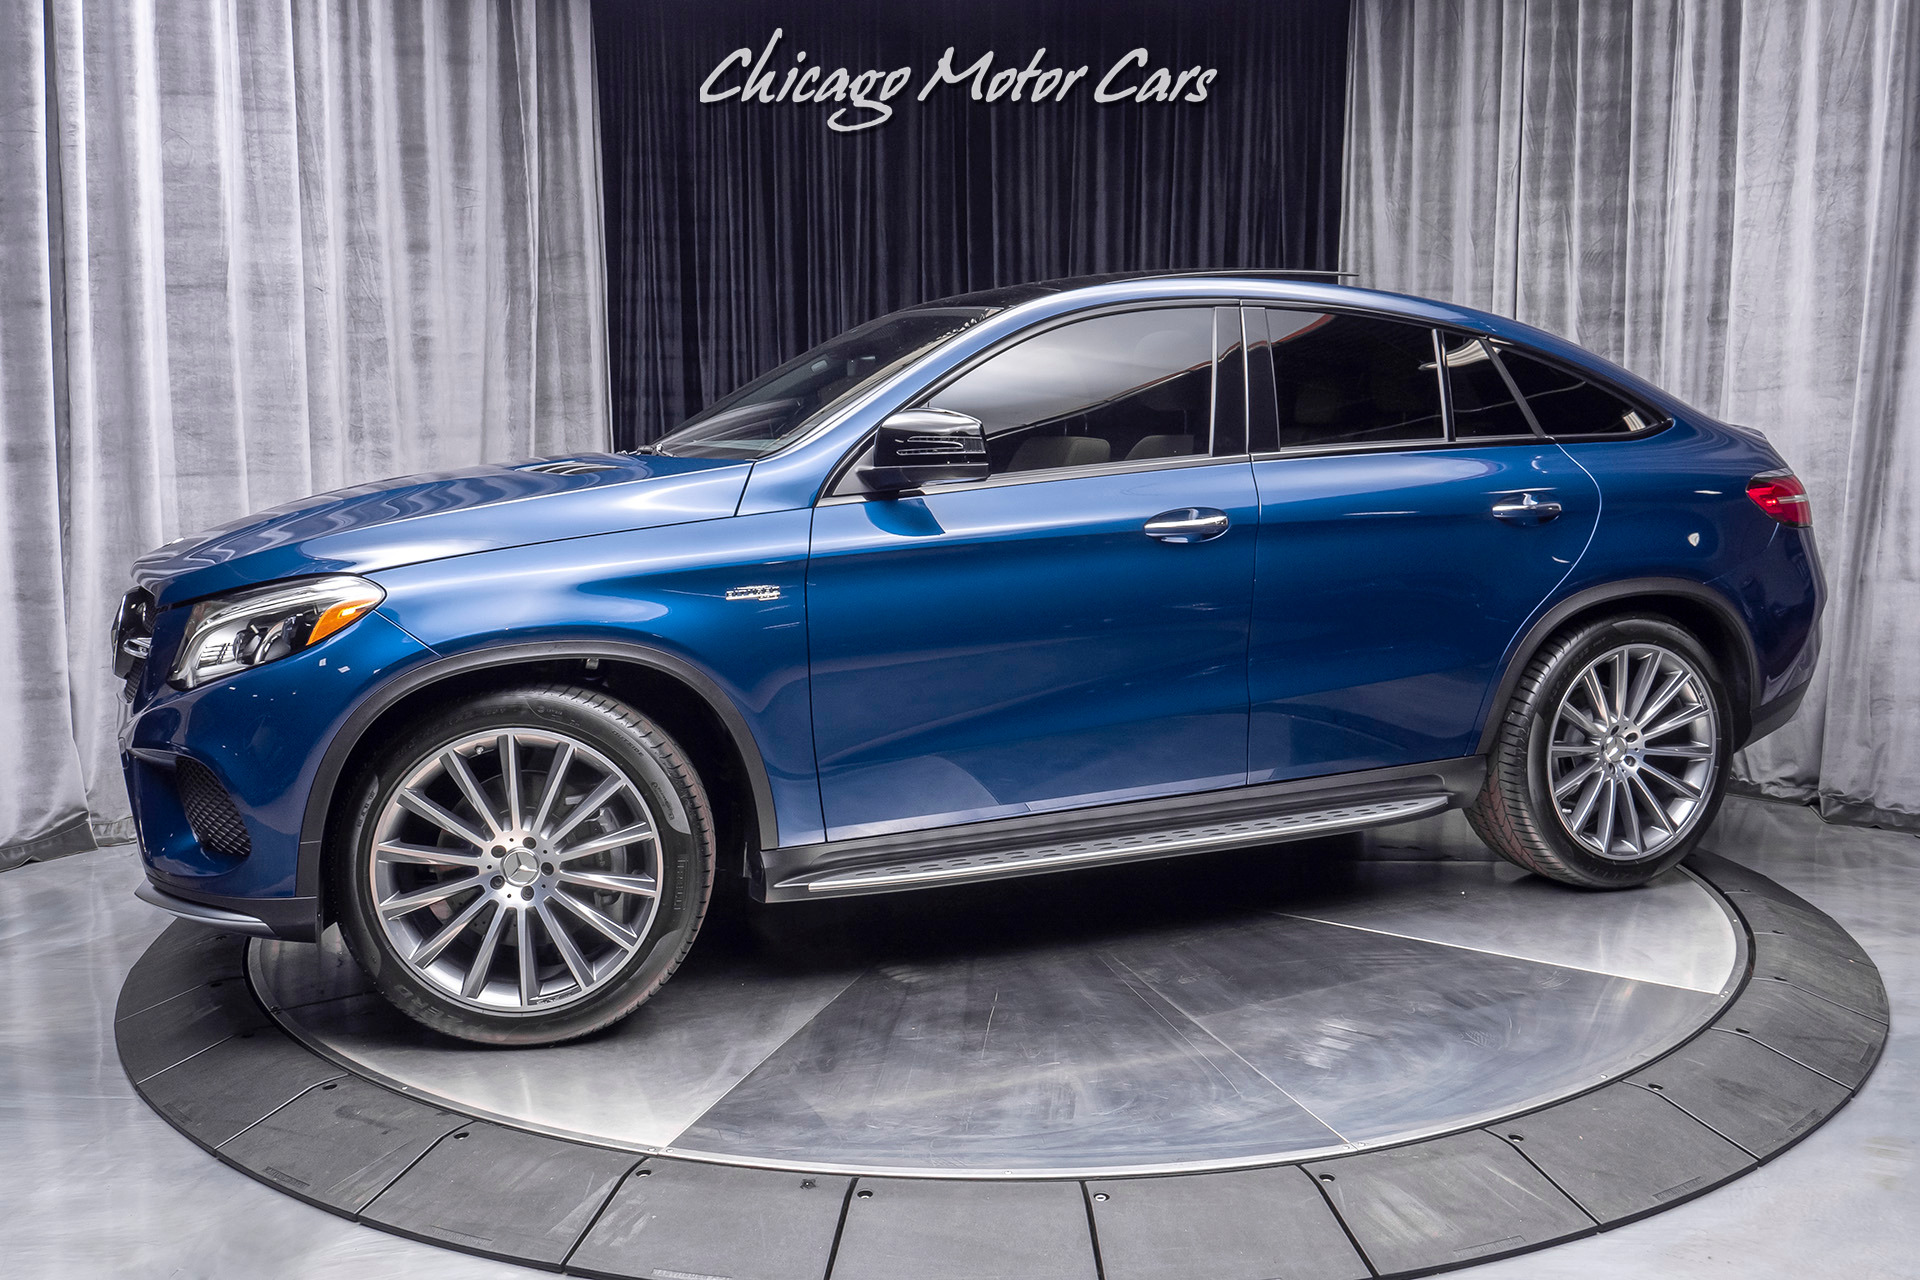 Used 2019 Mercedes-Benz GLE AMG GLE 43 For Sale (Special Pricing) | Chicago  Motor Cars Stock #16091